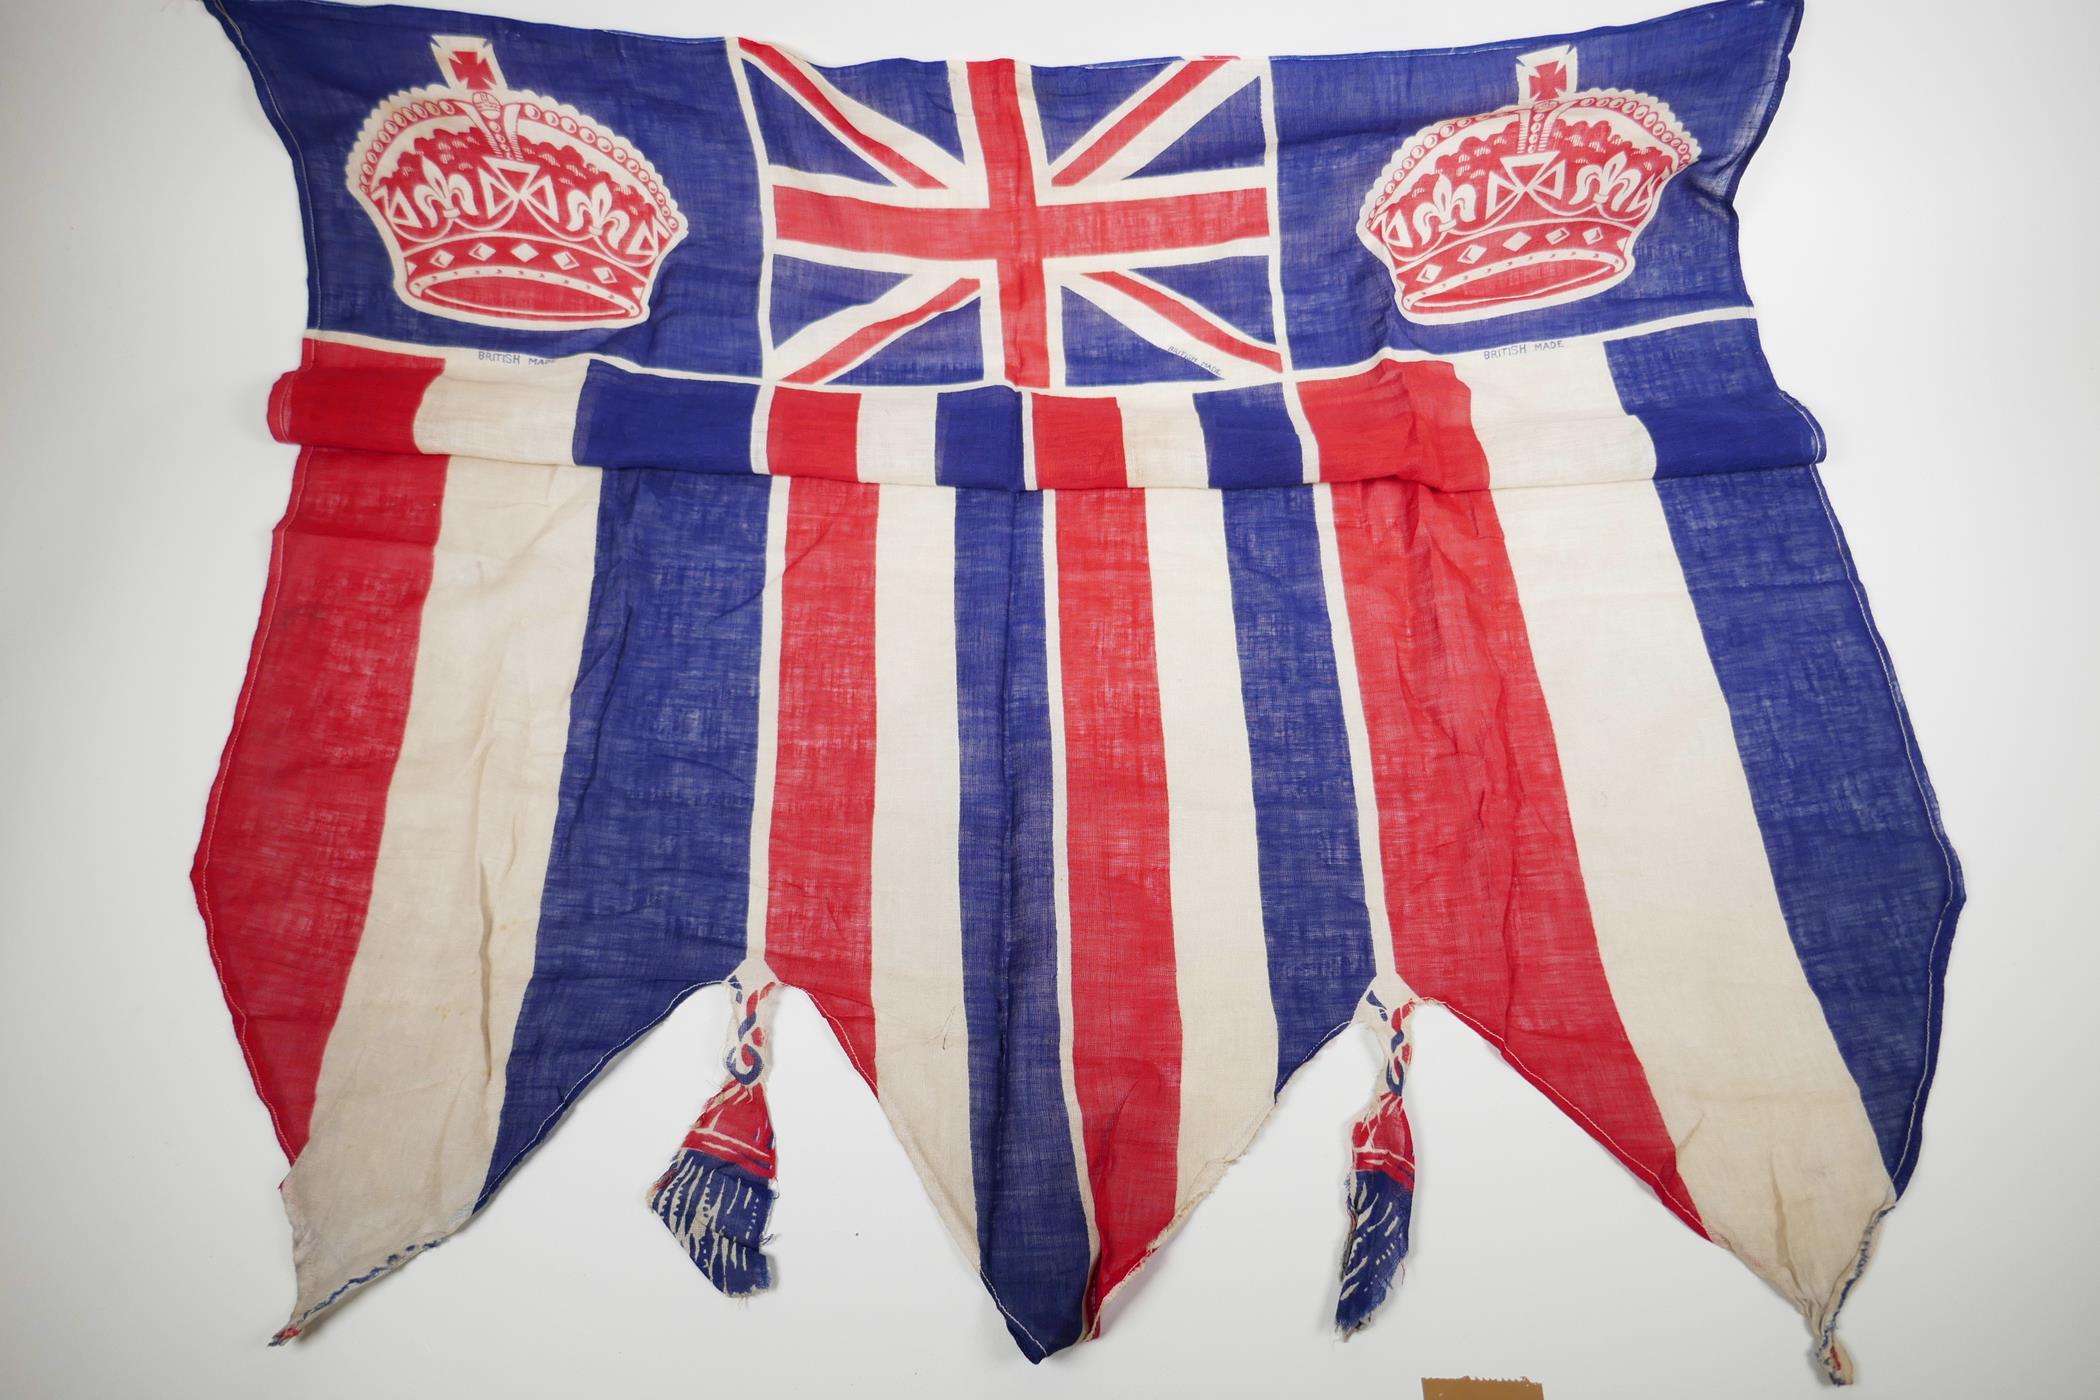 Three 1937 coronation flags in red, white and blue; a full size coronation bunting flag - Image 3 of 5